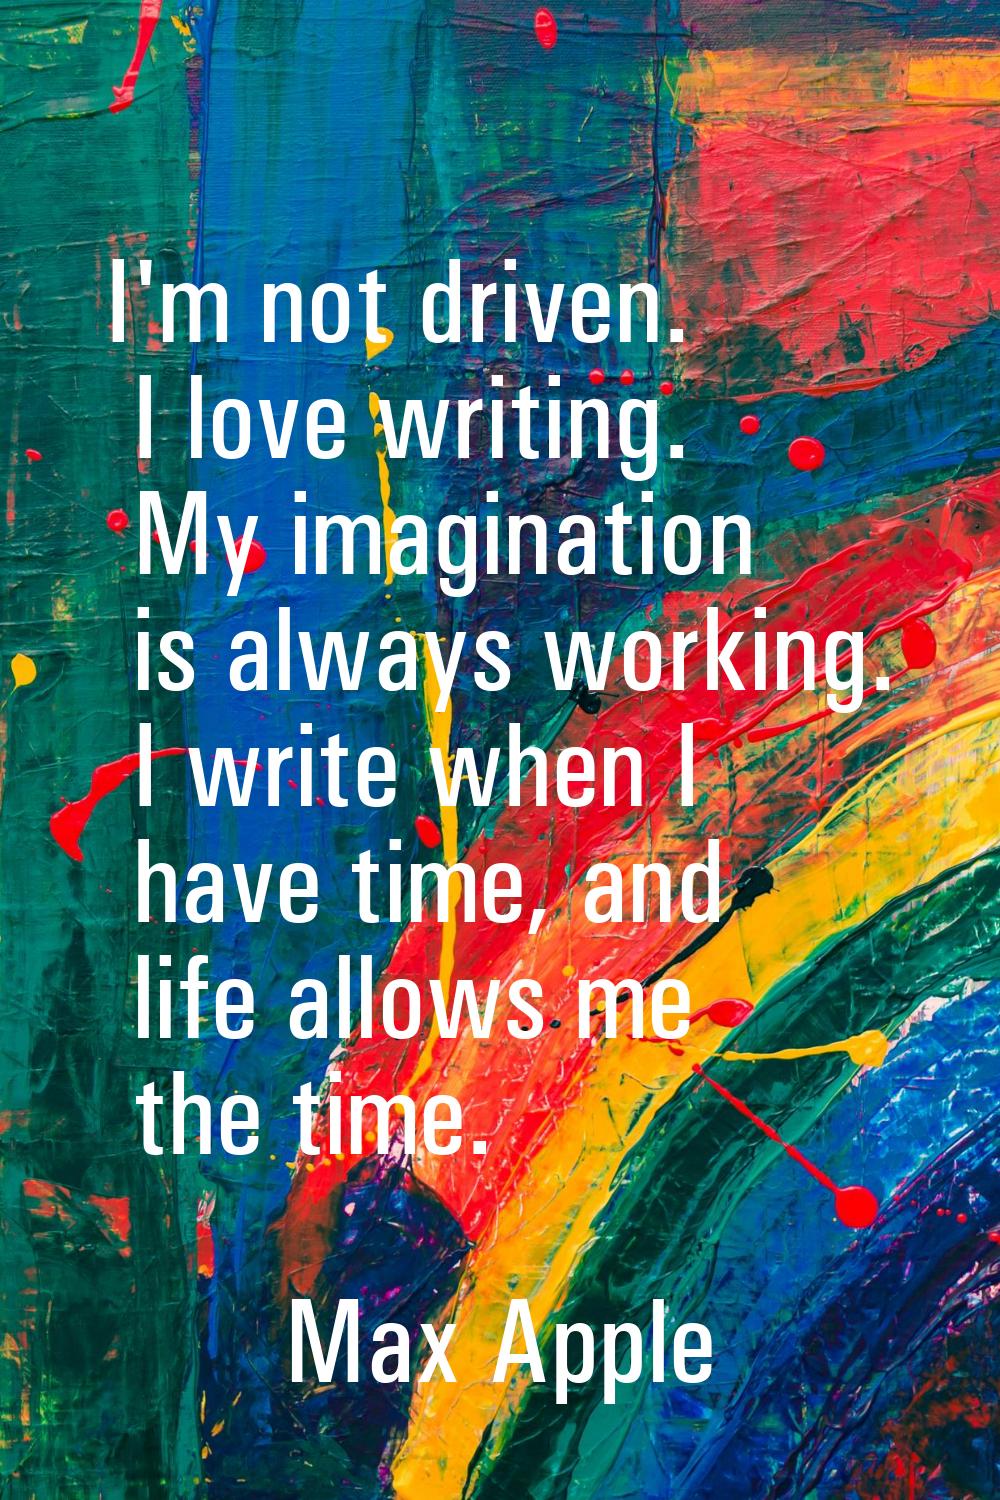 I'm not driven. I love writing. My imagination is always working. I write when I have time, and lif